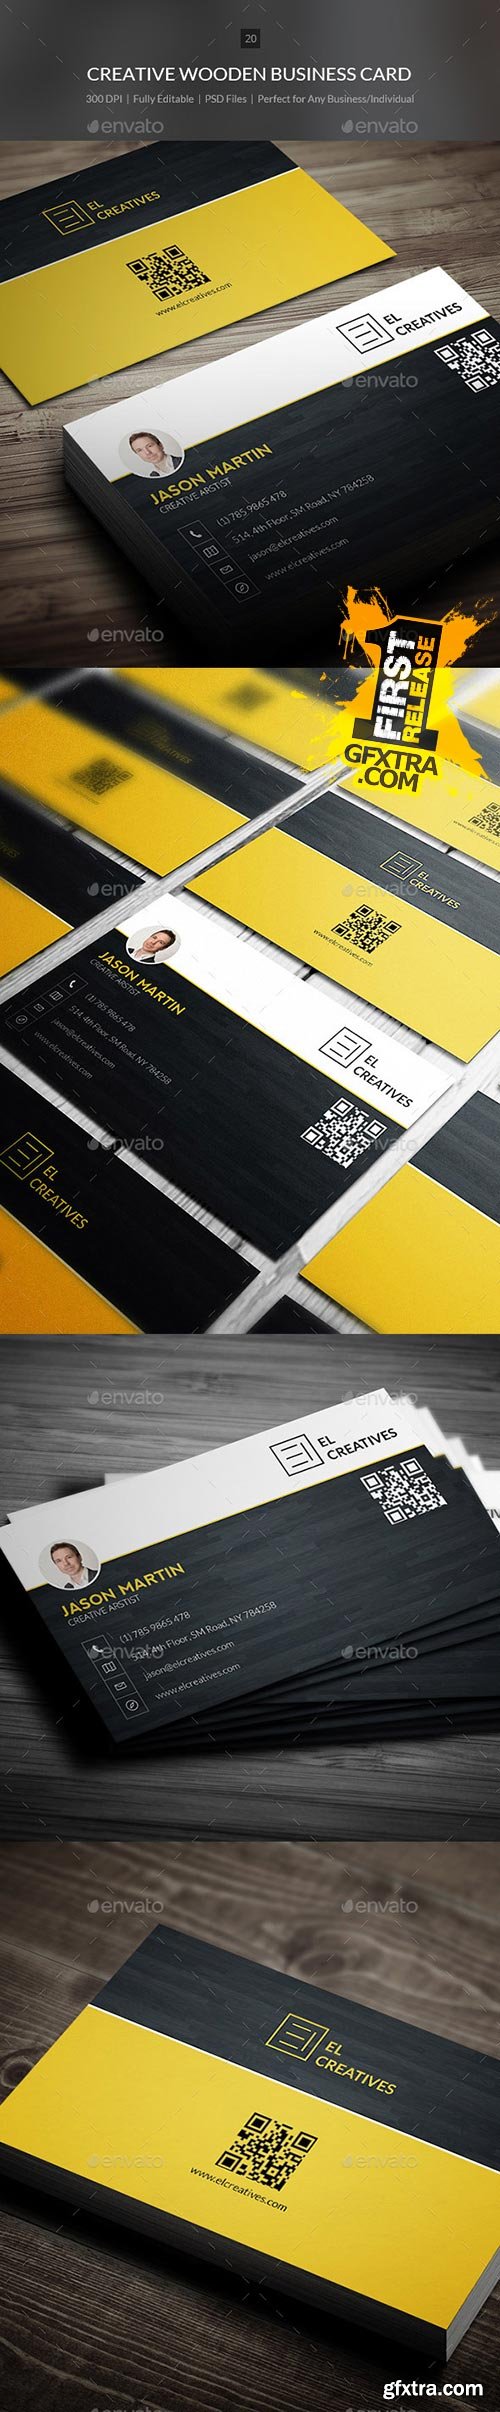 Graphicriver - Creative Wooden Business Card 10226958